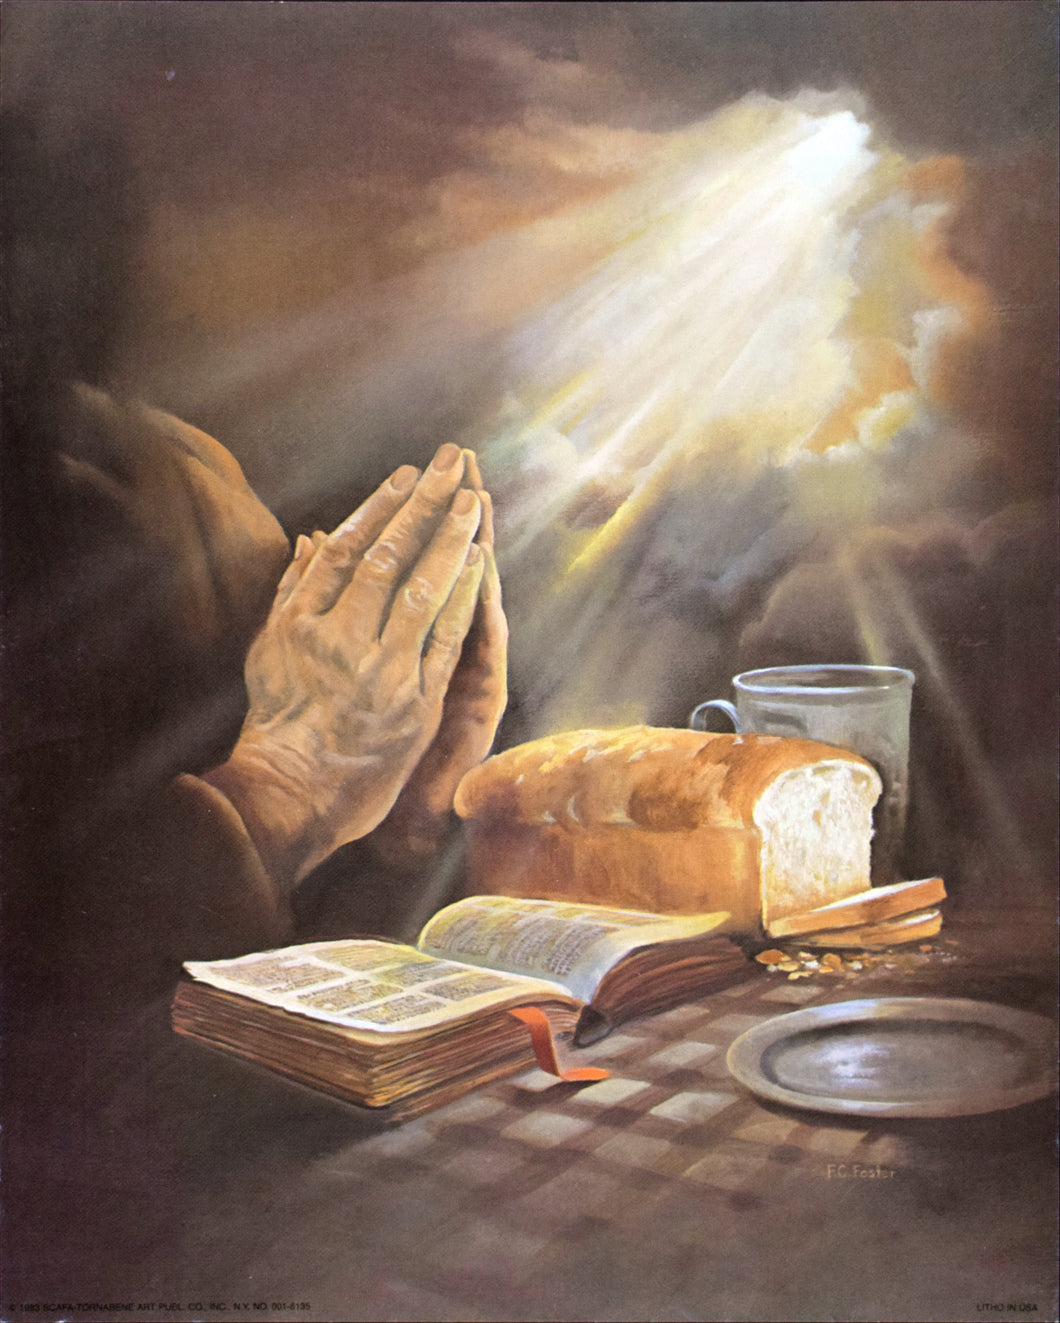 Praying Over Bread by F.C. Foster